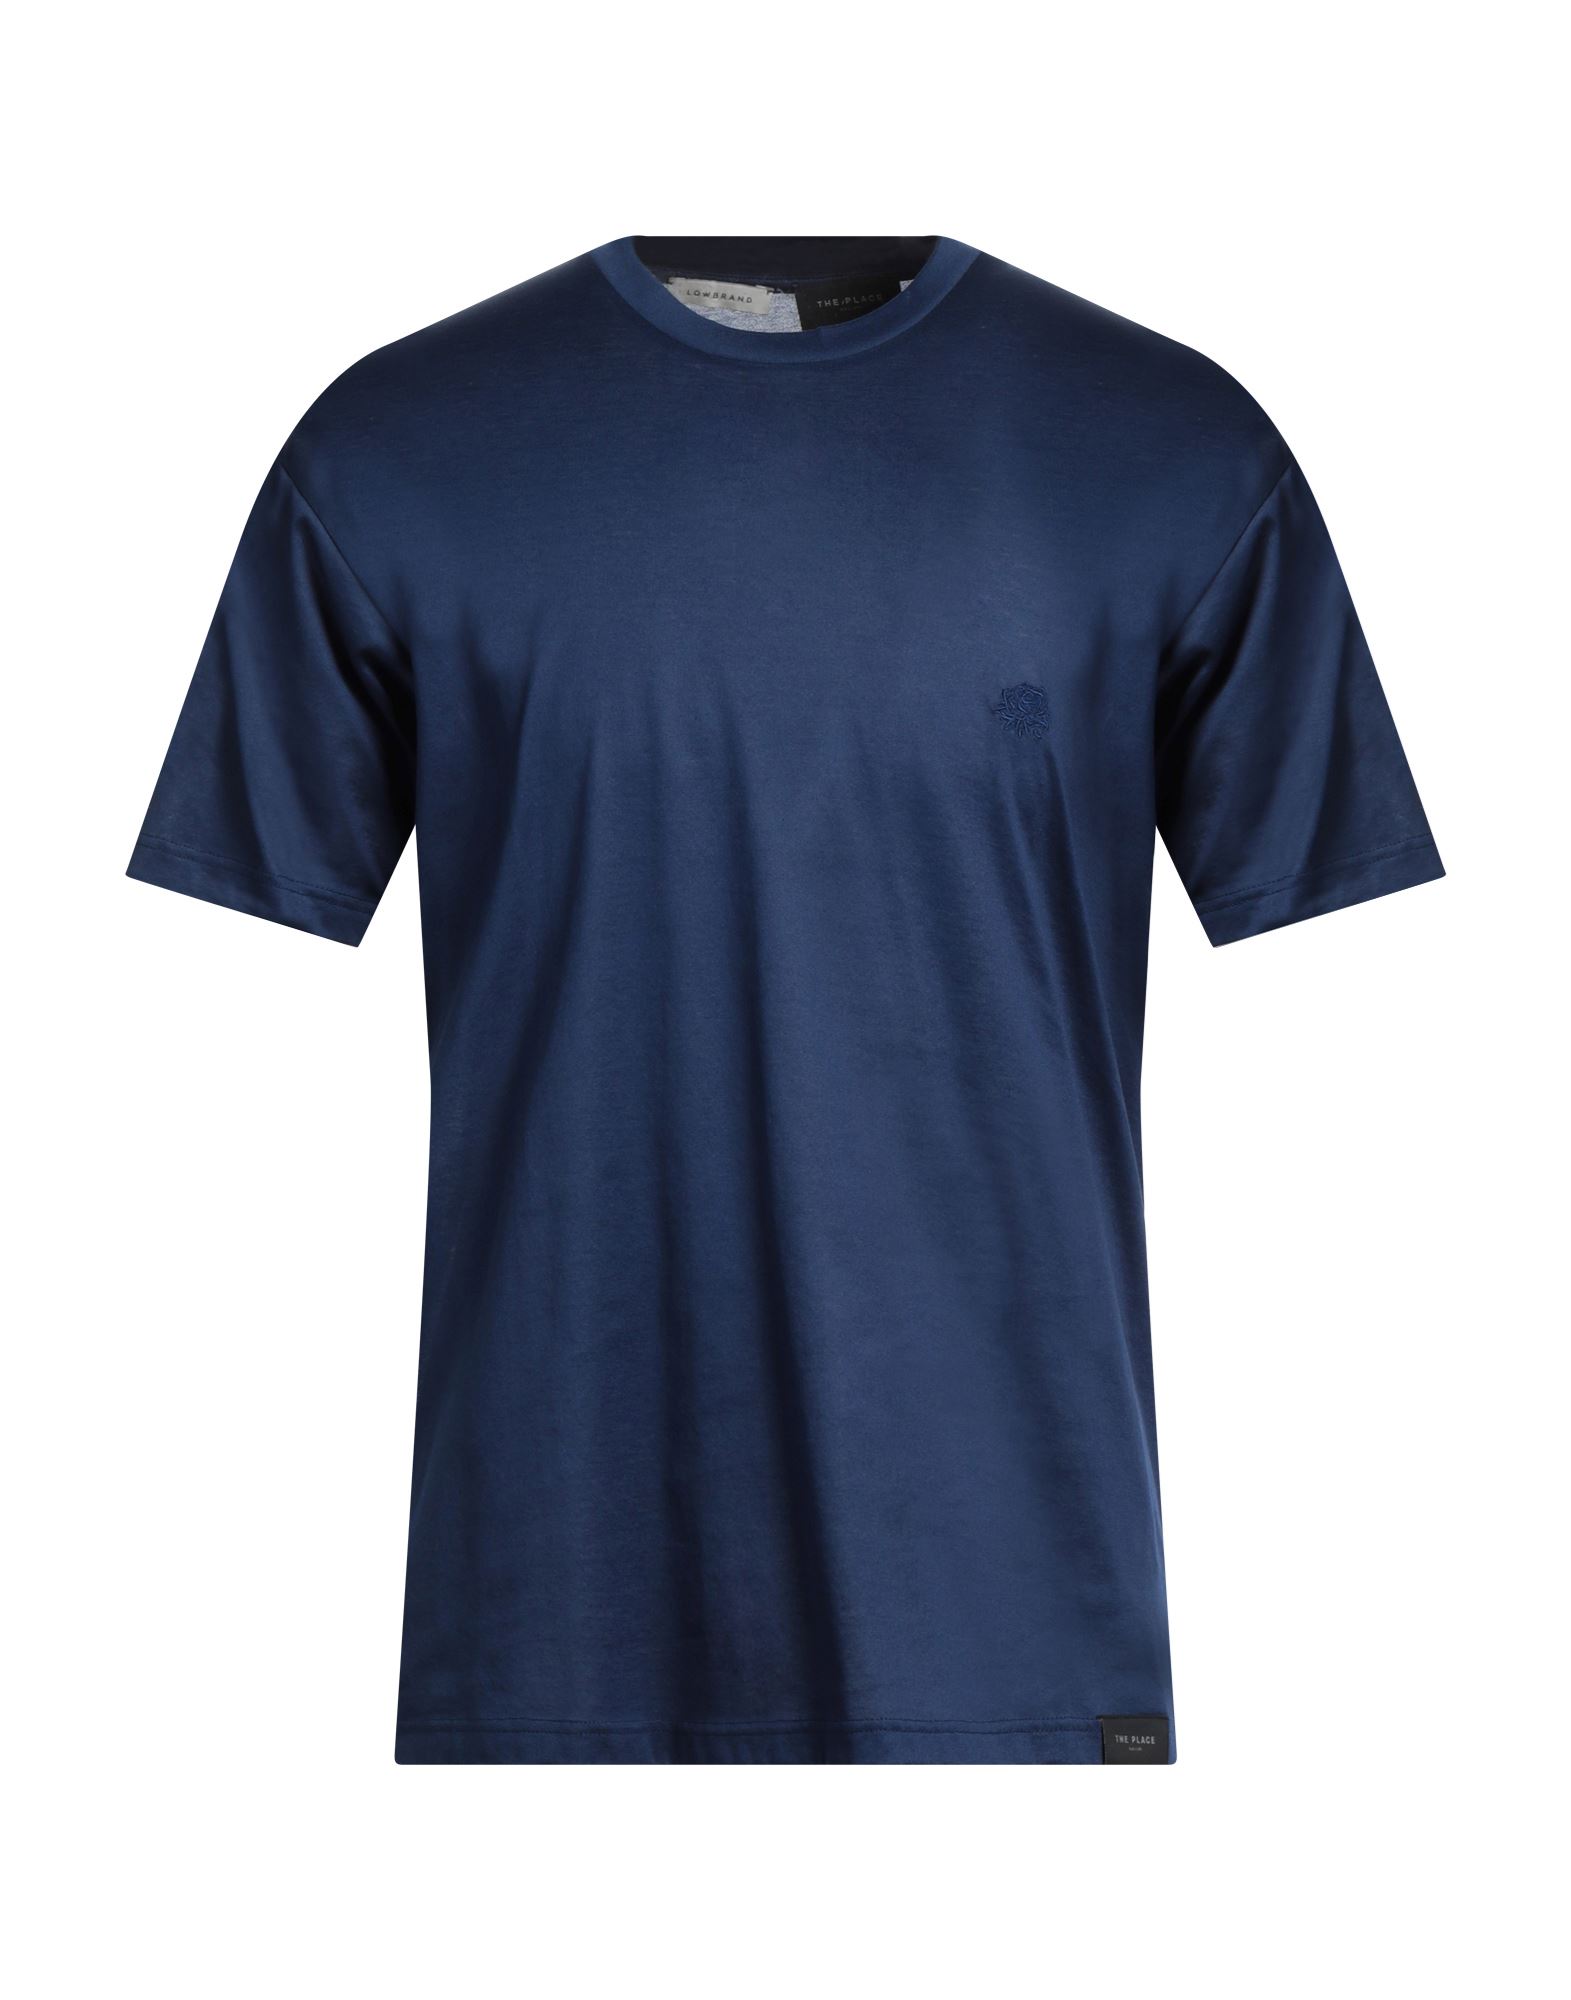 Low Brand Man T-shirt Blue Size 1 Cotton In Navy Blue